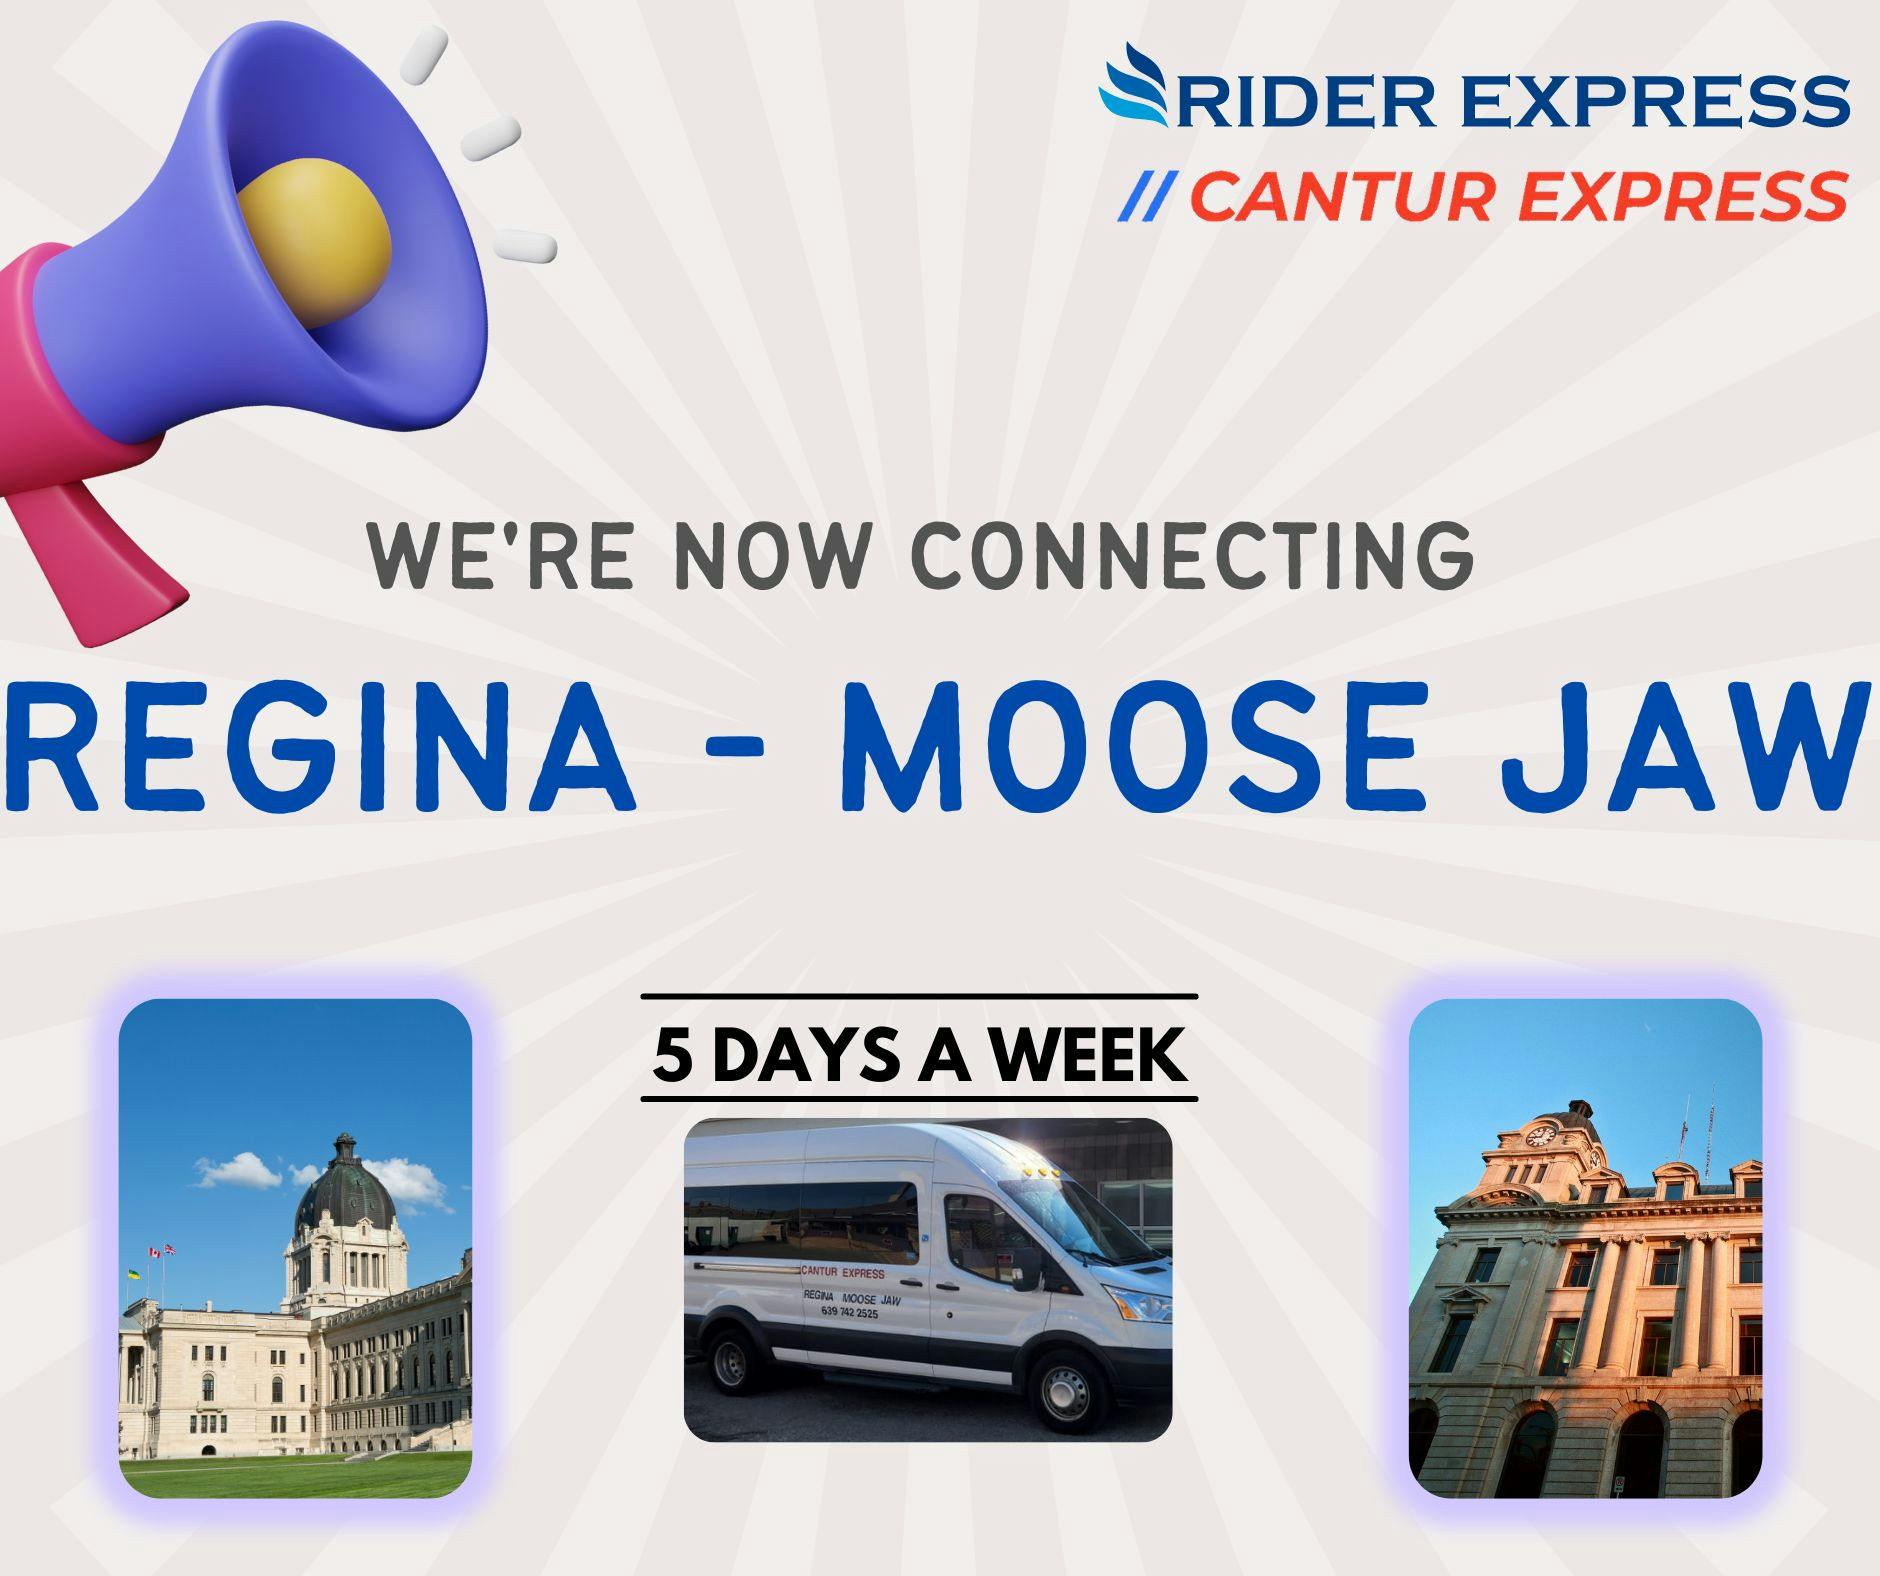 Rider Express is now connecting Regina and Moose Jaw